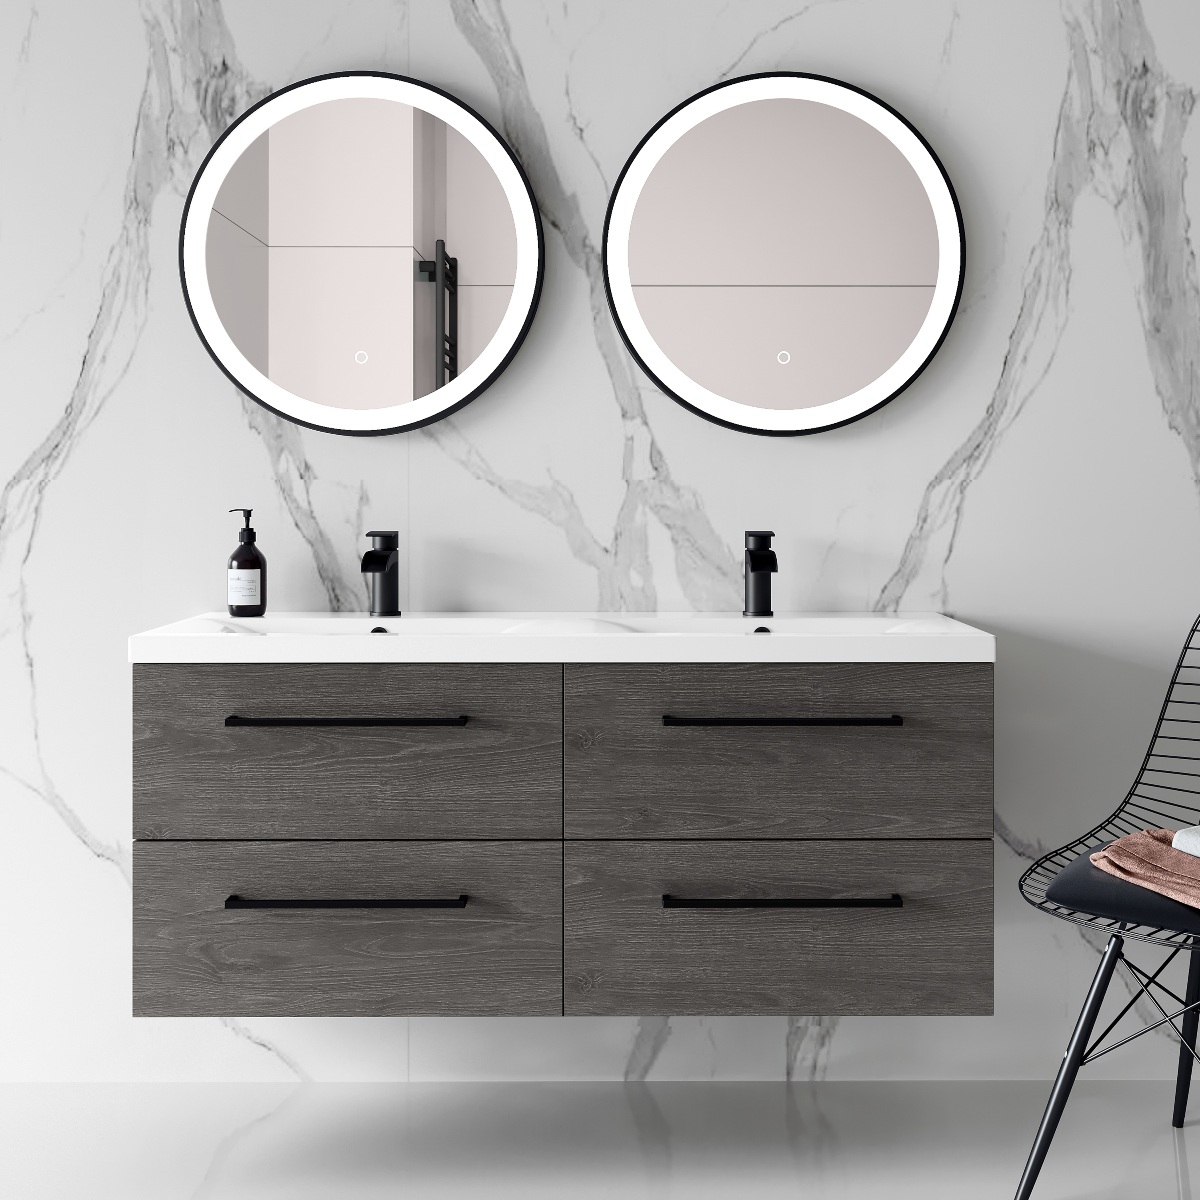 a dark wood double vanity unit with two sinks, lots of storage, matt black taps and two round illuminated mirrors